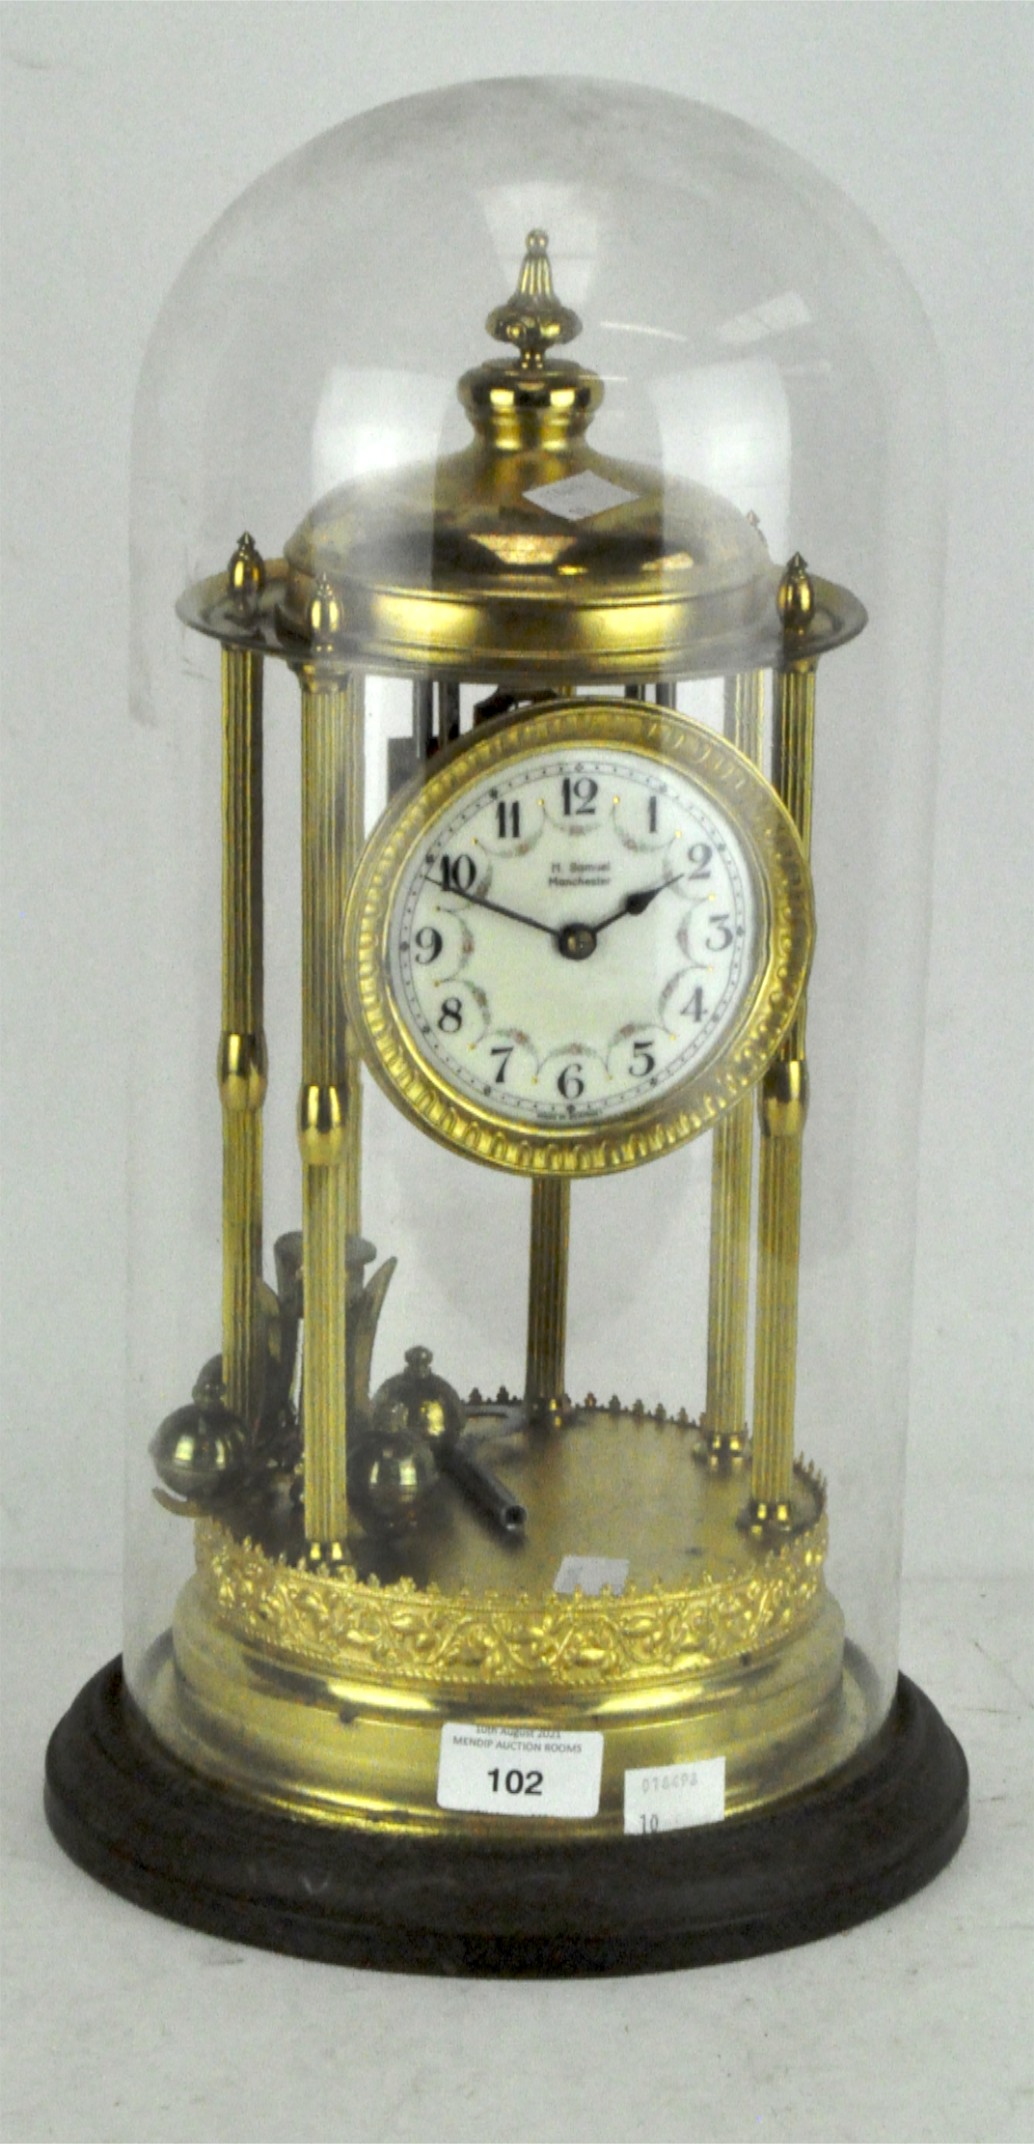 A 20th century brass torsion four-ball pendulum mantel clock, the face with Arabic numerals,